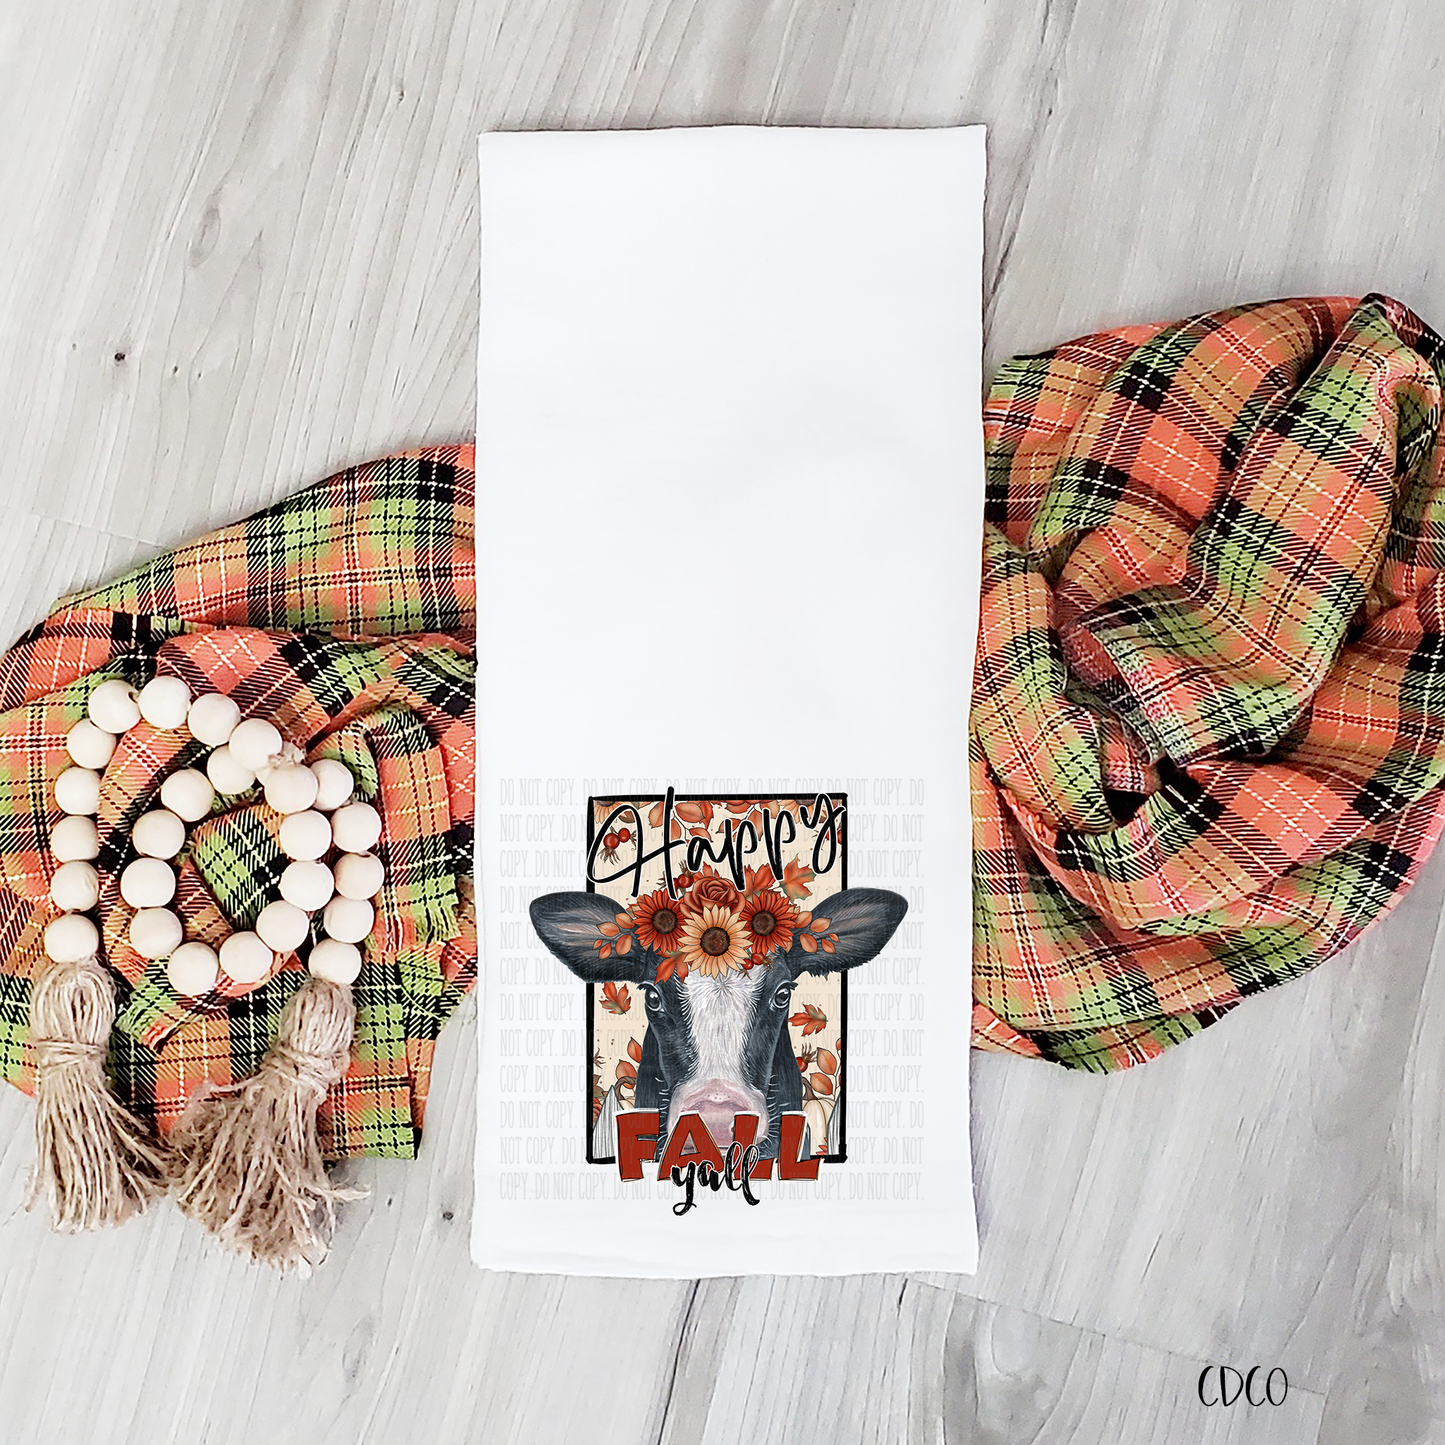 Happy Fall Yall Cow - Toddler/Tea Towel (350°-375°)